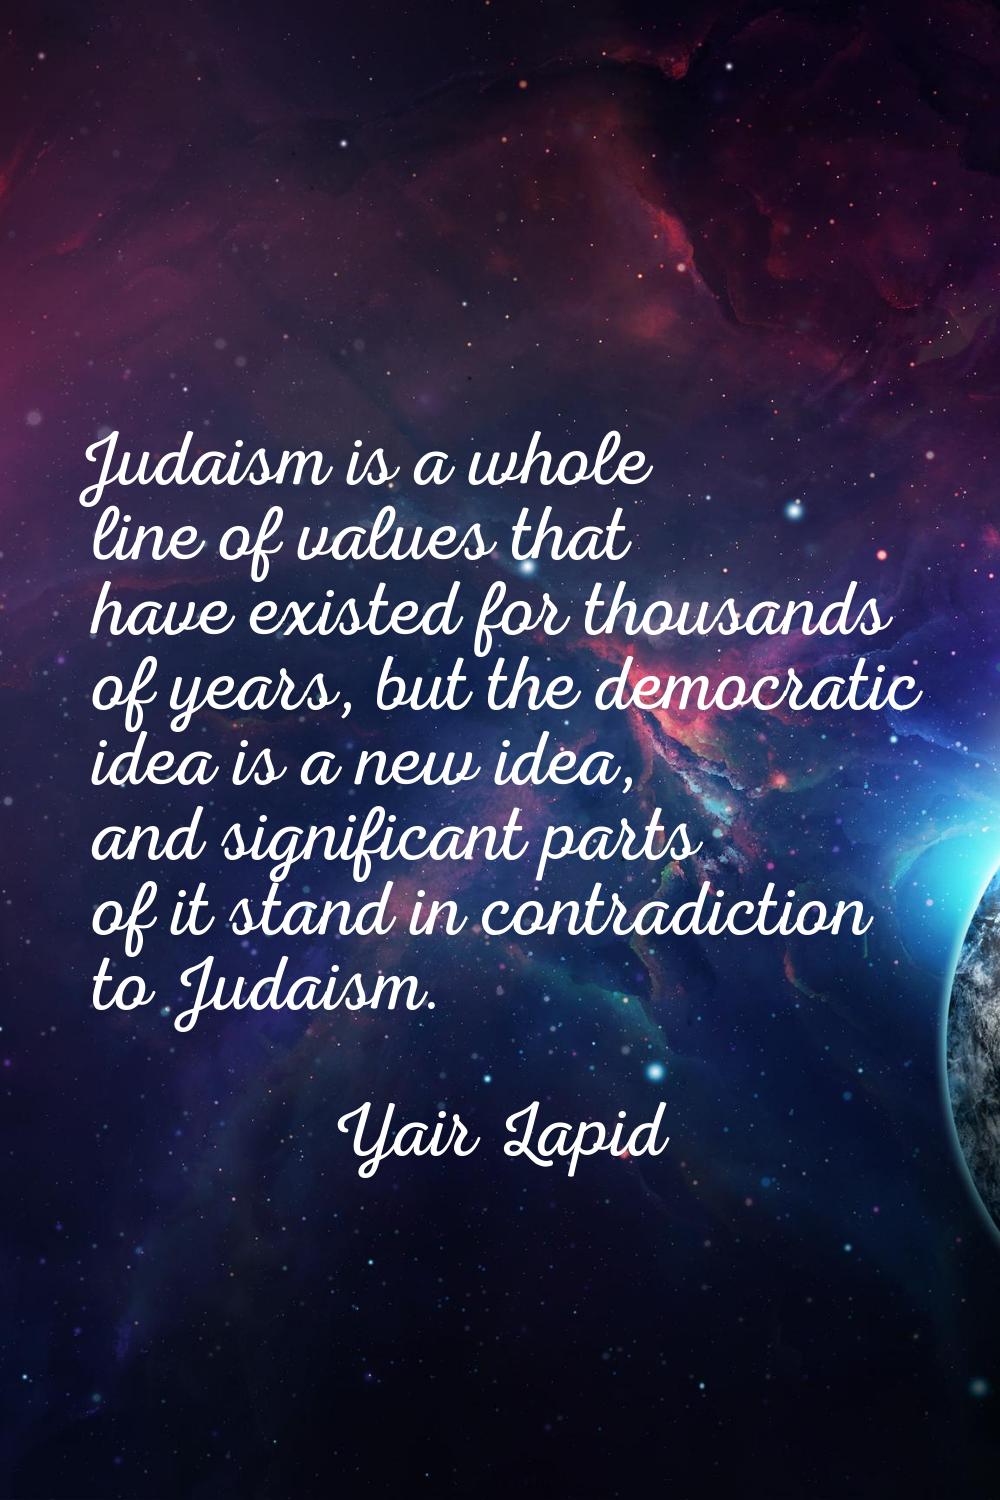 Judaism is a whole line of values that have existed for thousands of years, but the democratic idea